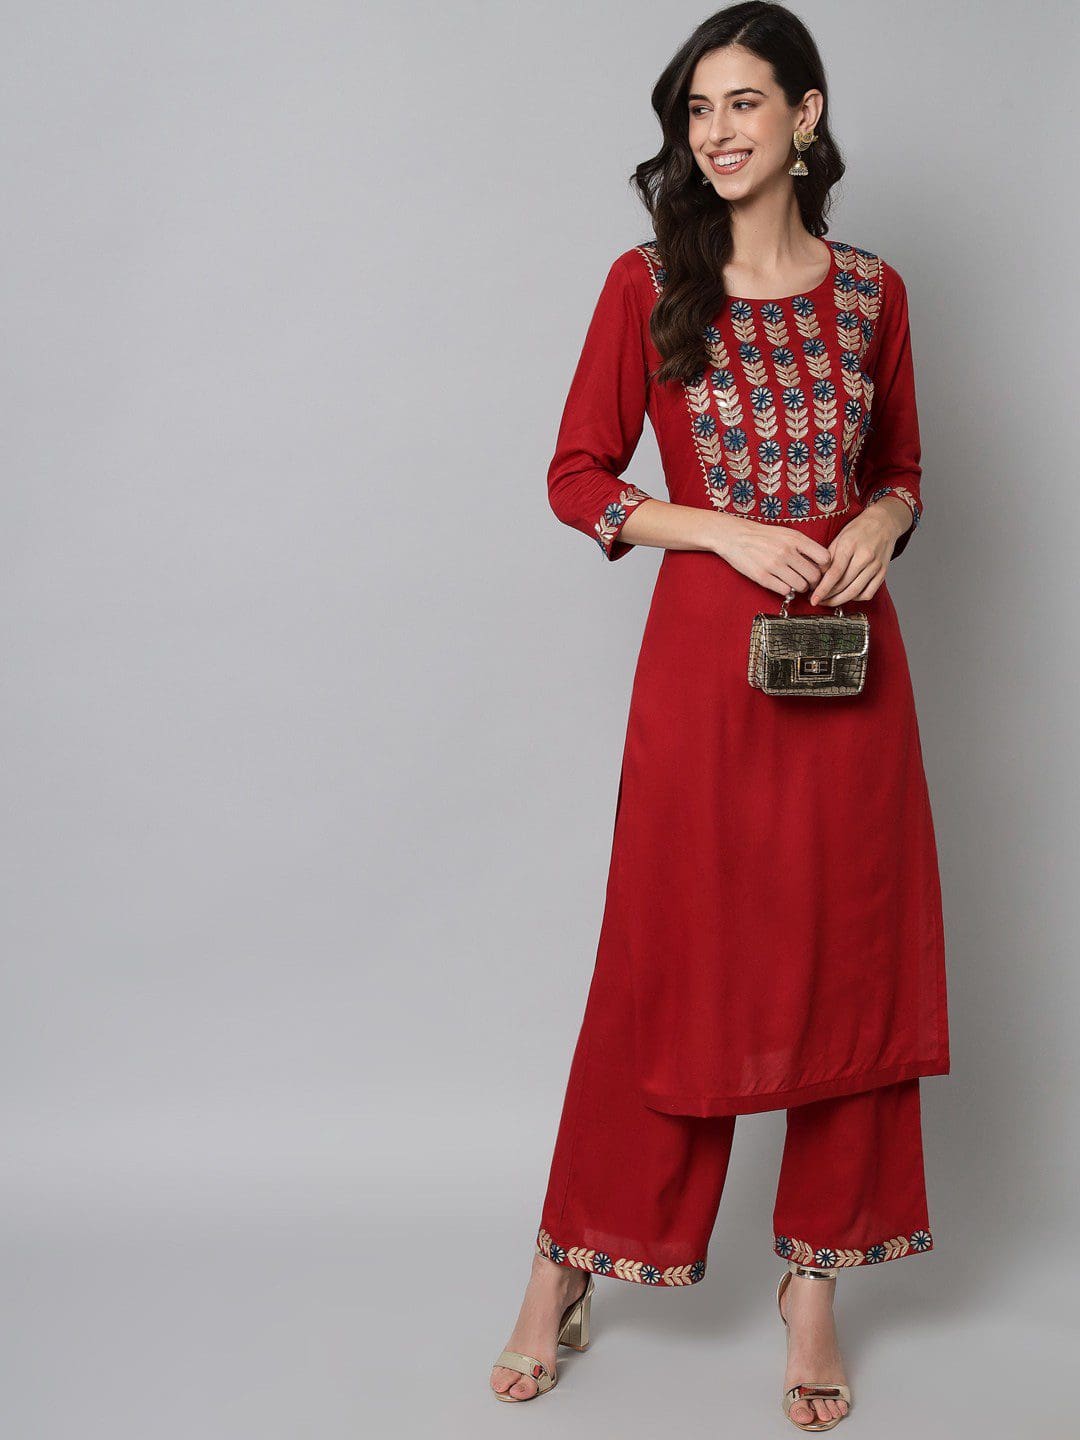 Exclusive Rayon Embroidery Red kurti With Palazzo For Women.